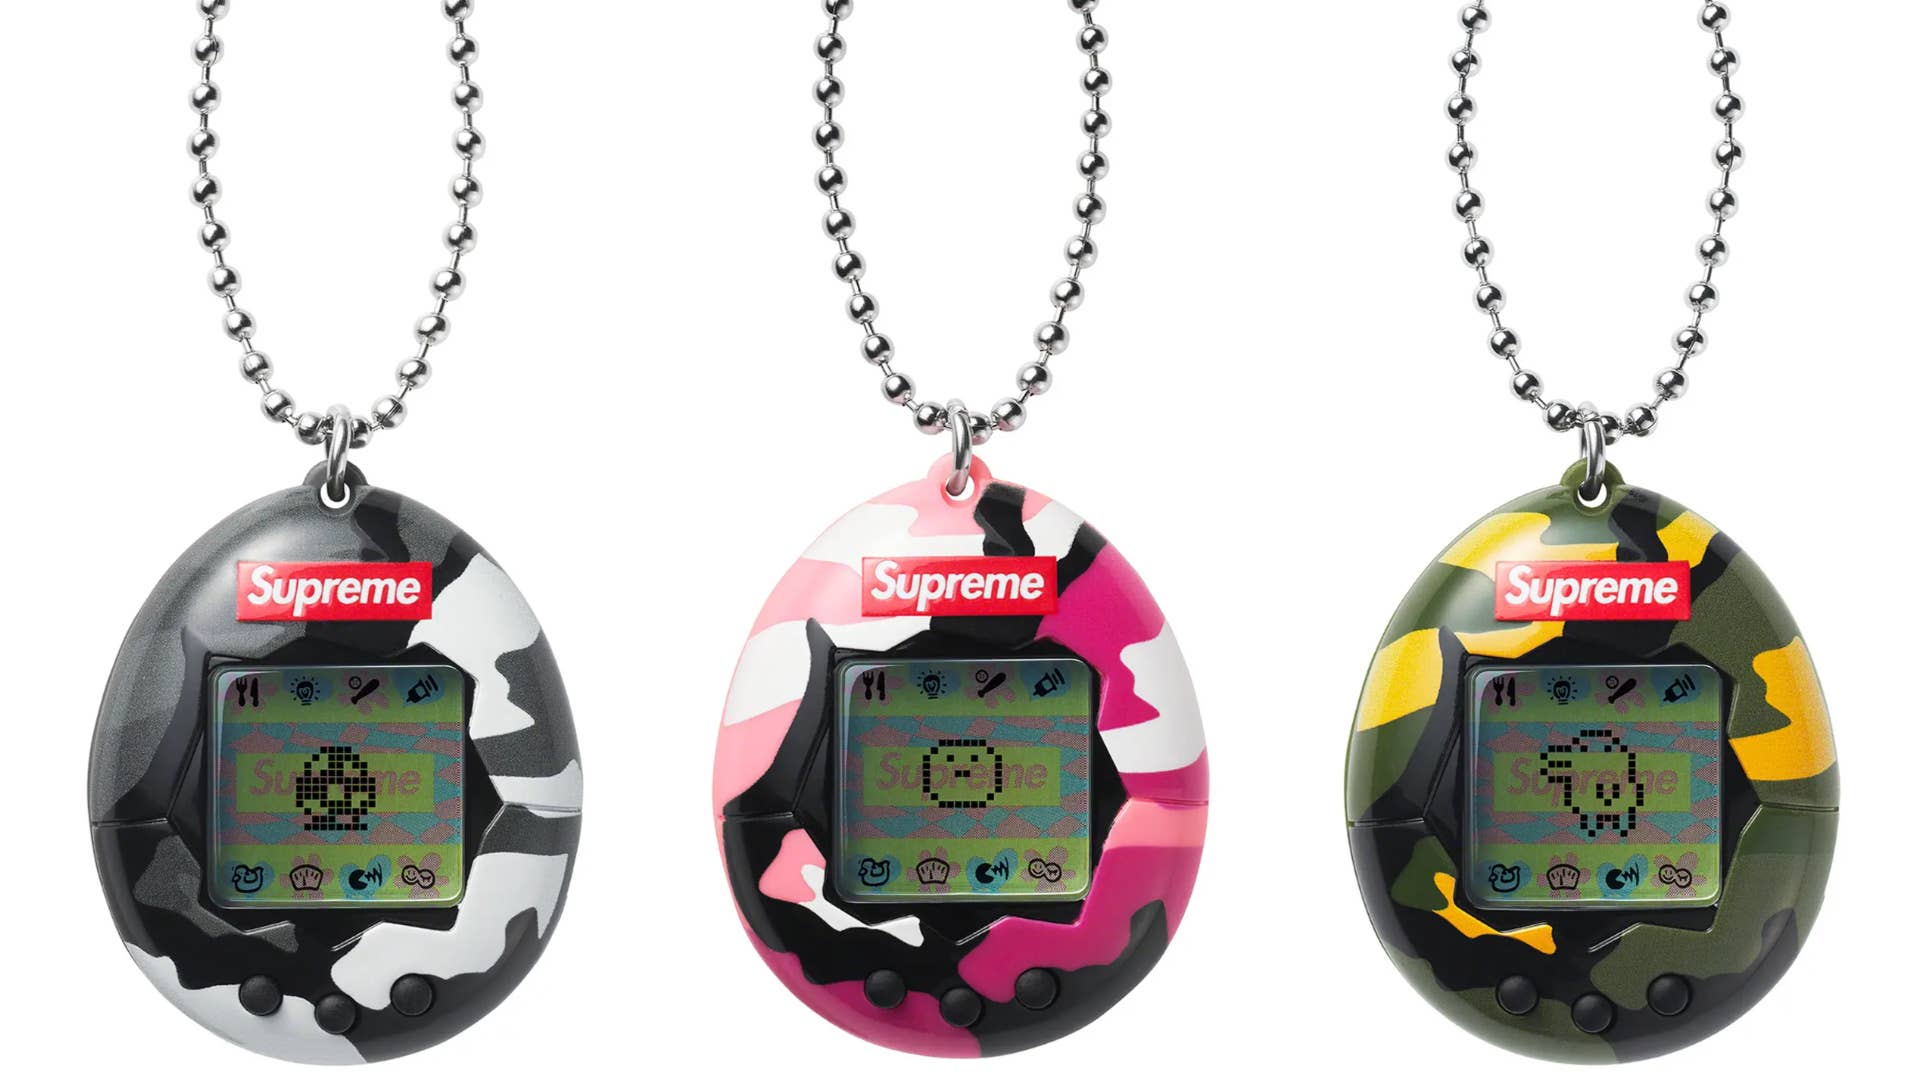 Best Style Releases This Week: Supreme Tamagotchis, Palace x